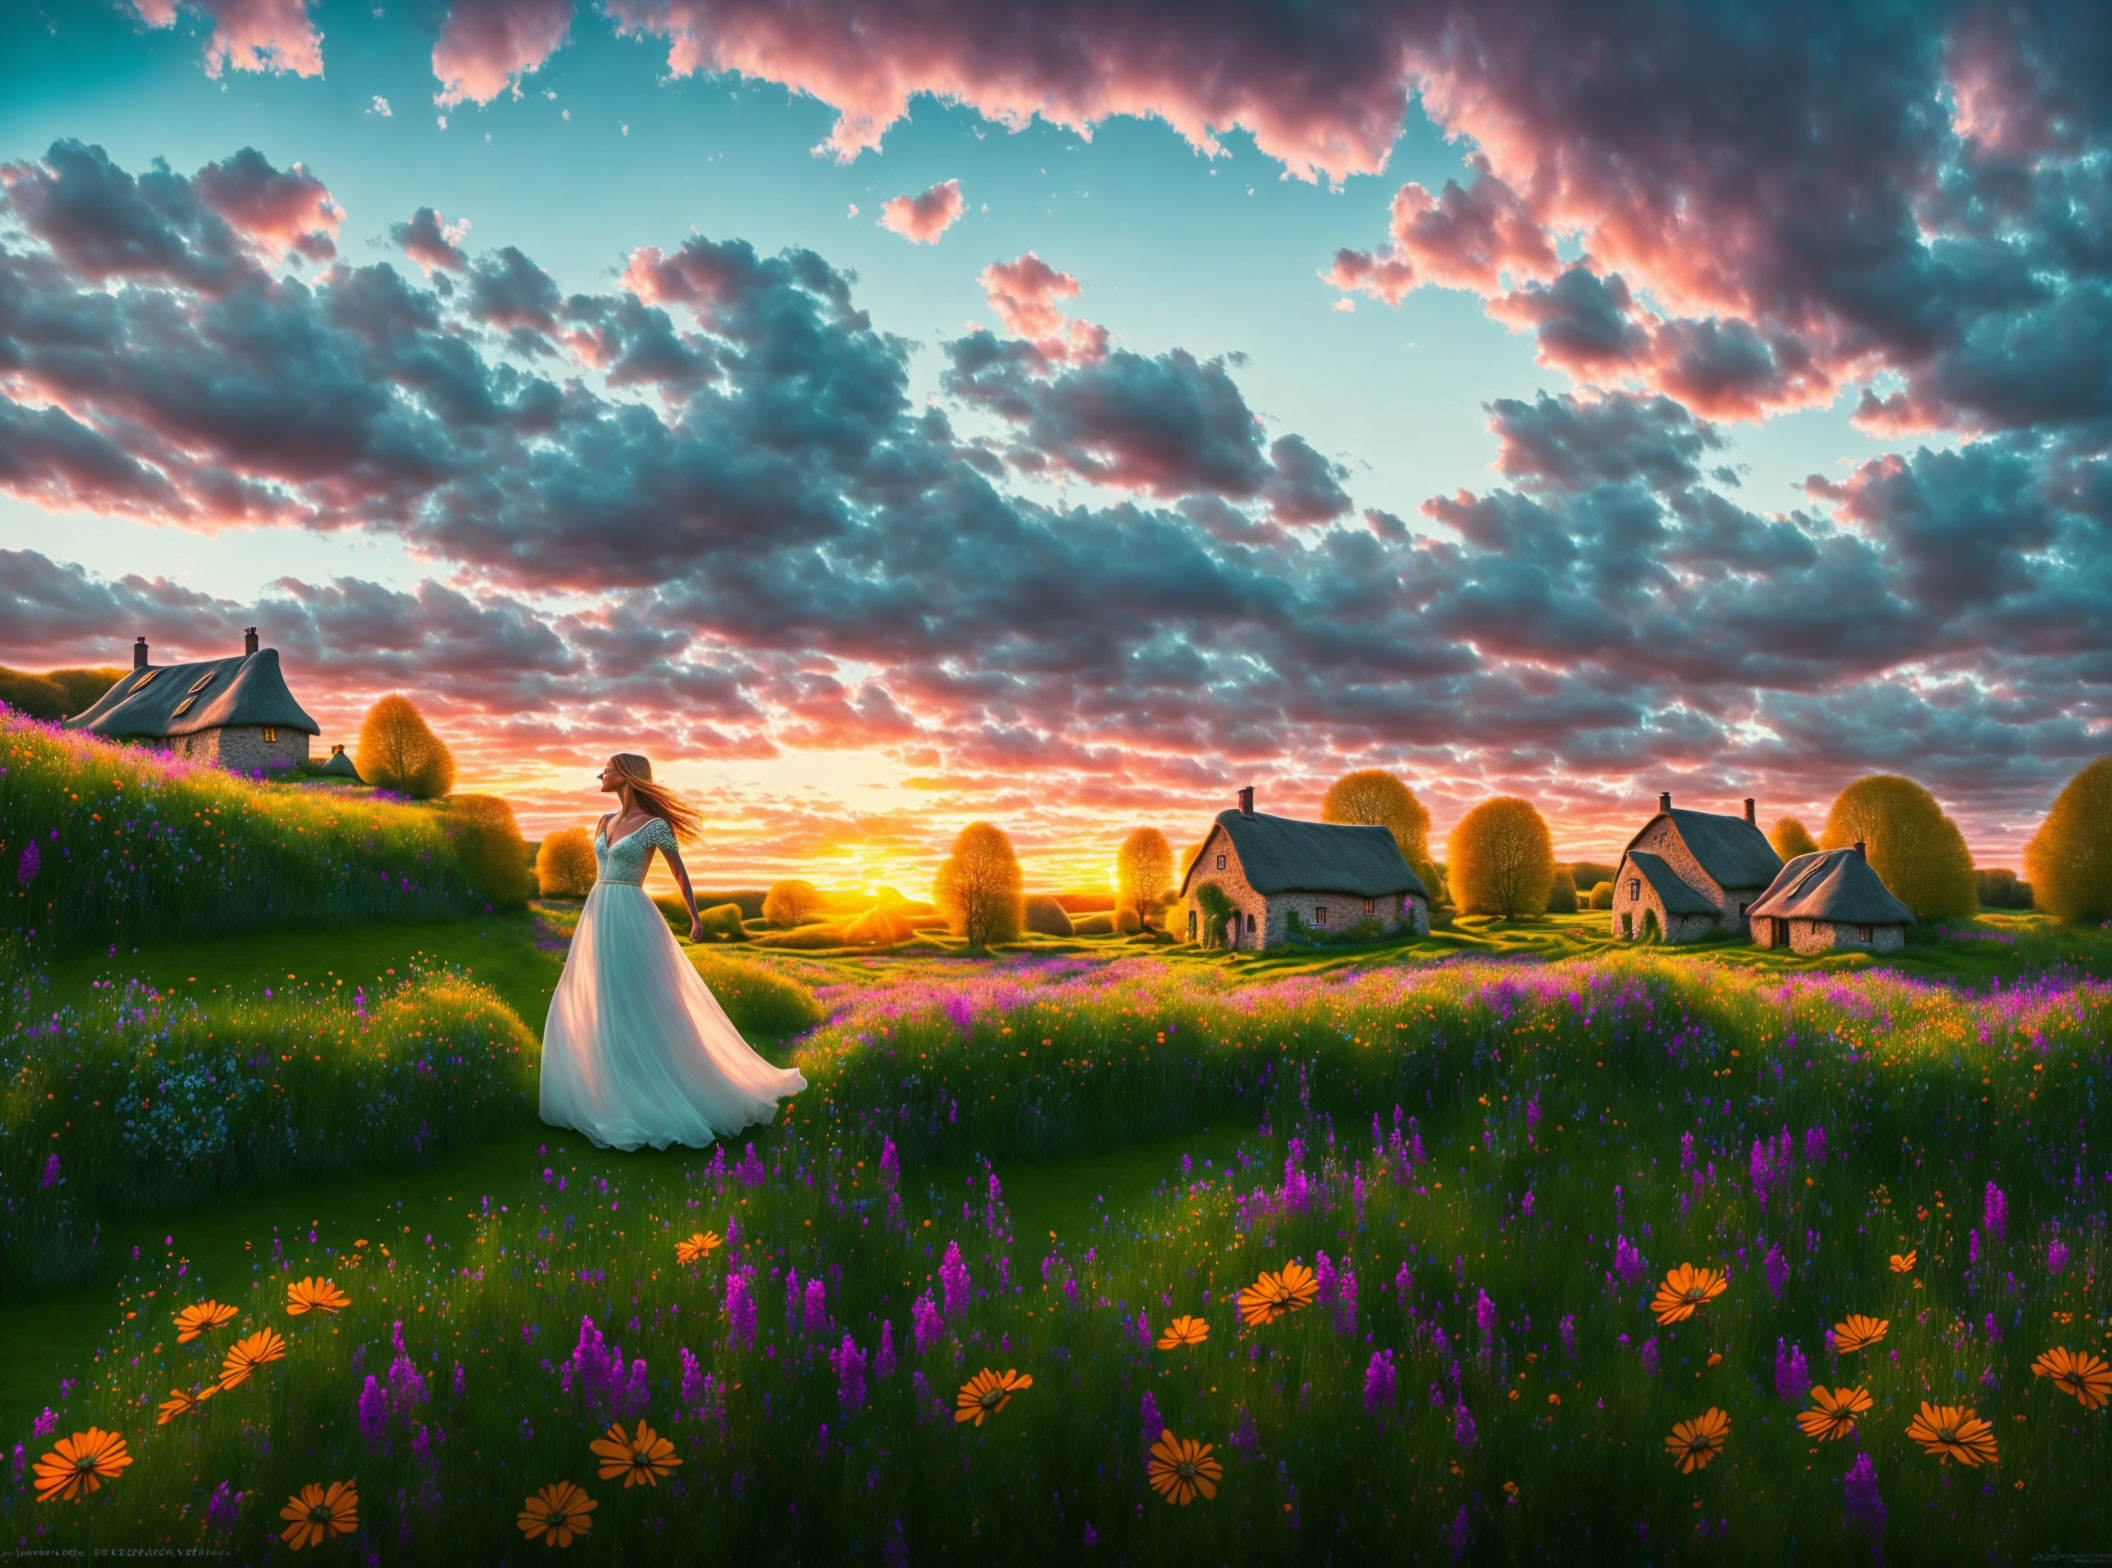 Woman in white dress in colorful meadow at sunset with cottages and vibrant sky.